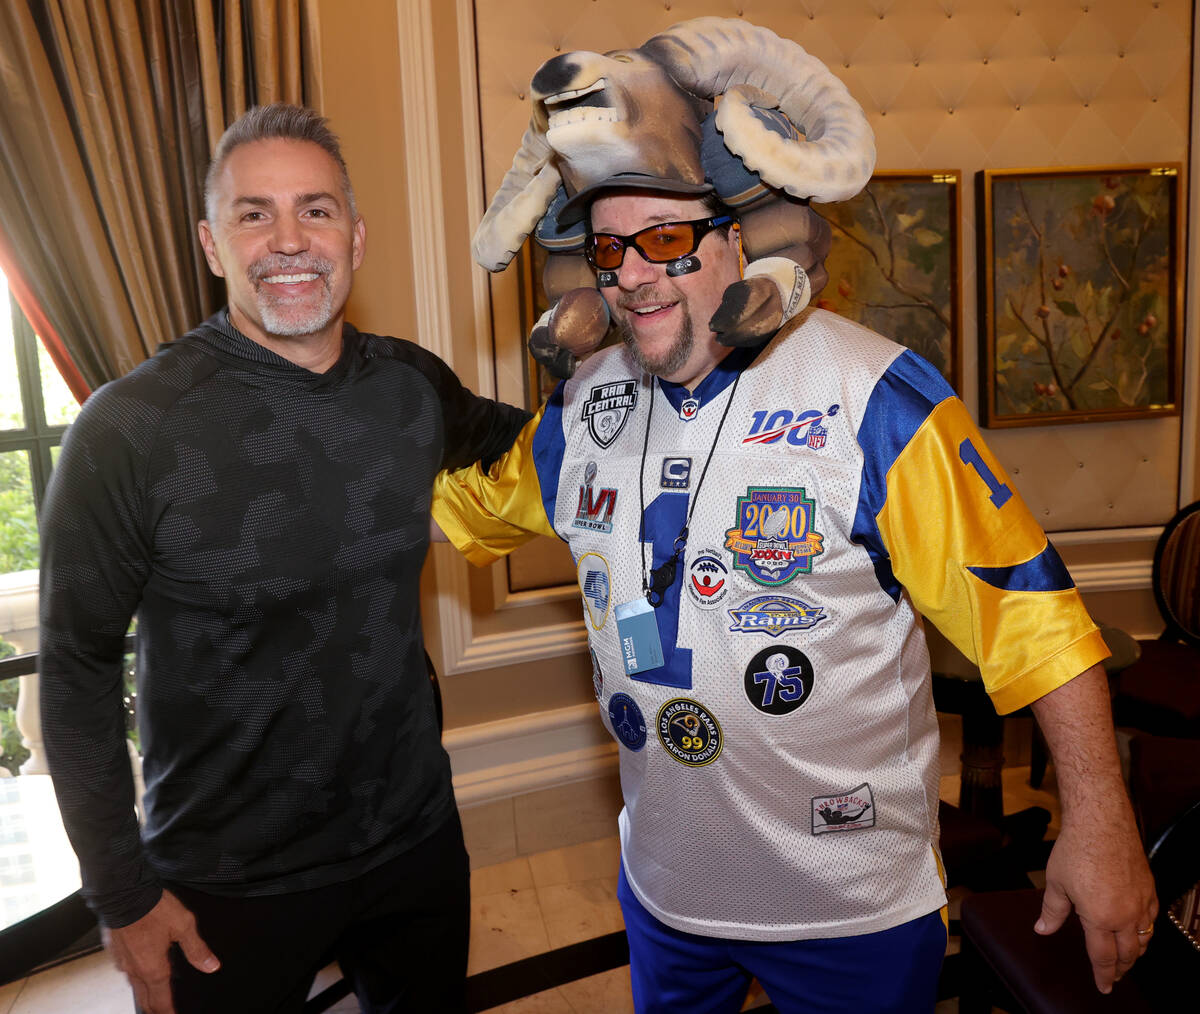 Karl “Rams Man” Sides of St. Louis poses with NFL great Kurt Warner at the Bellag ...